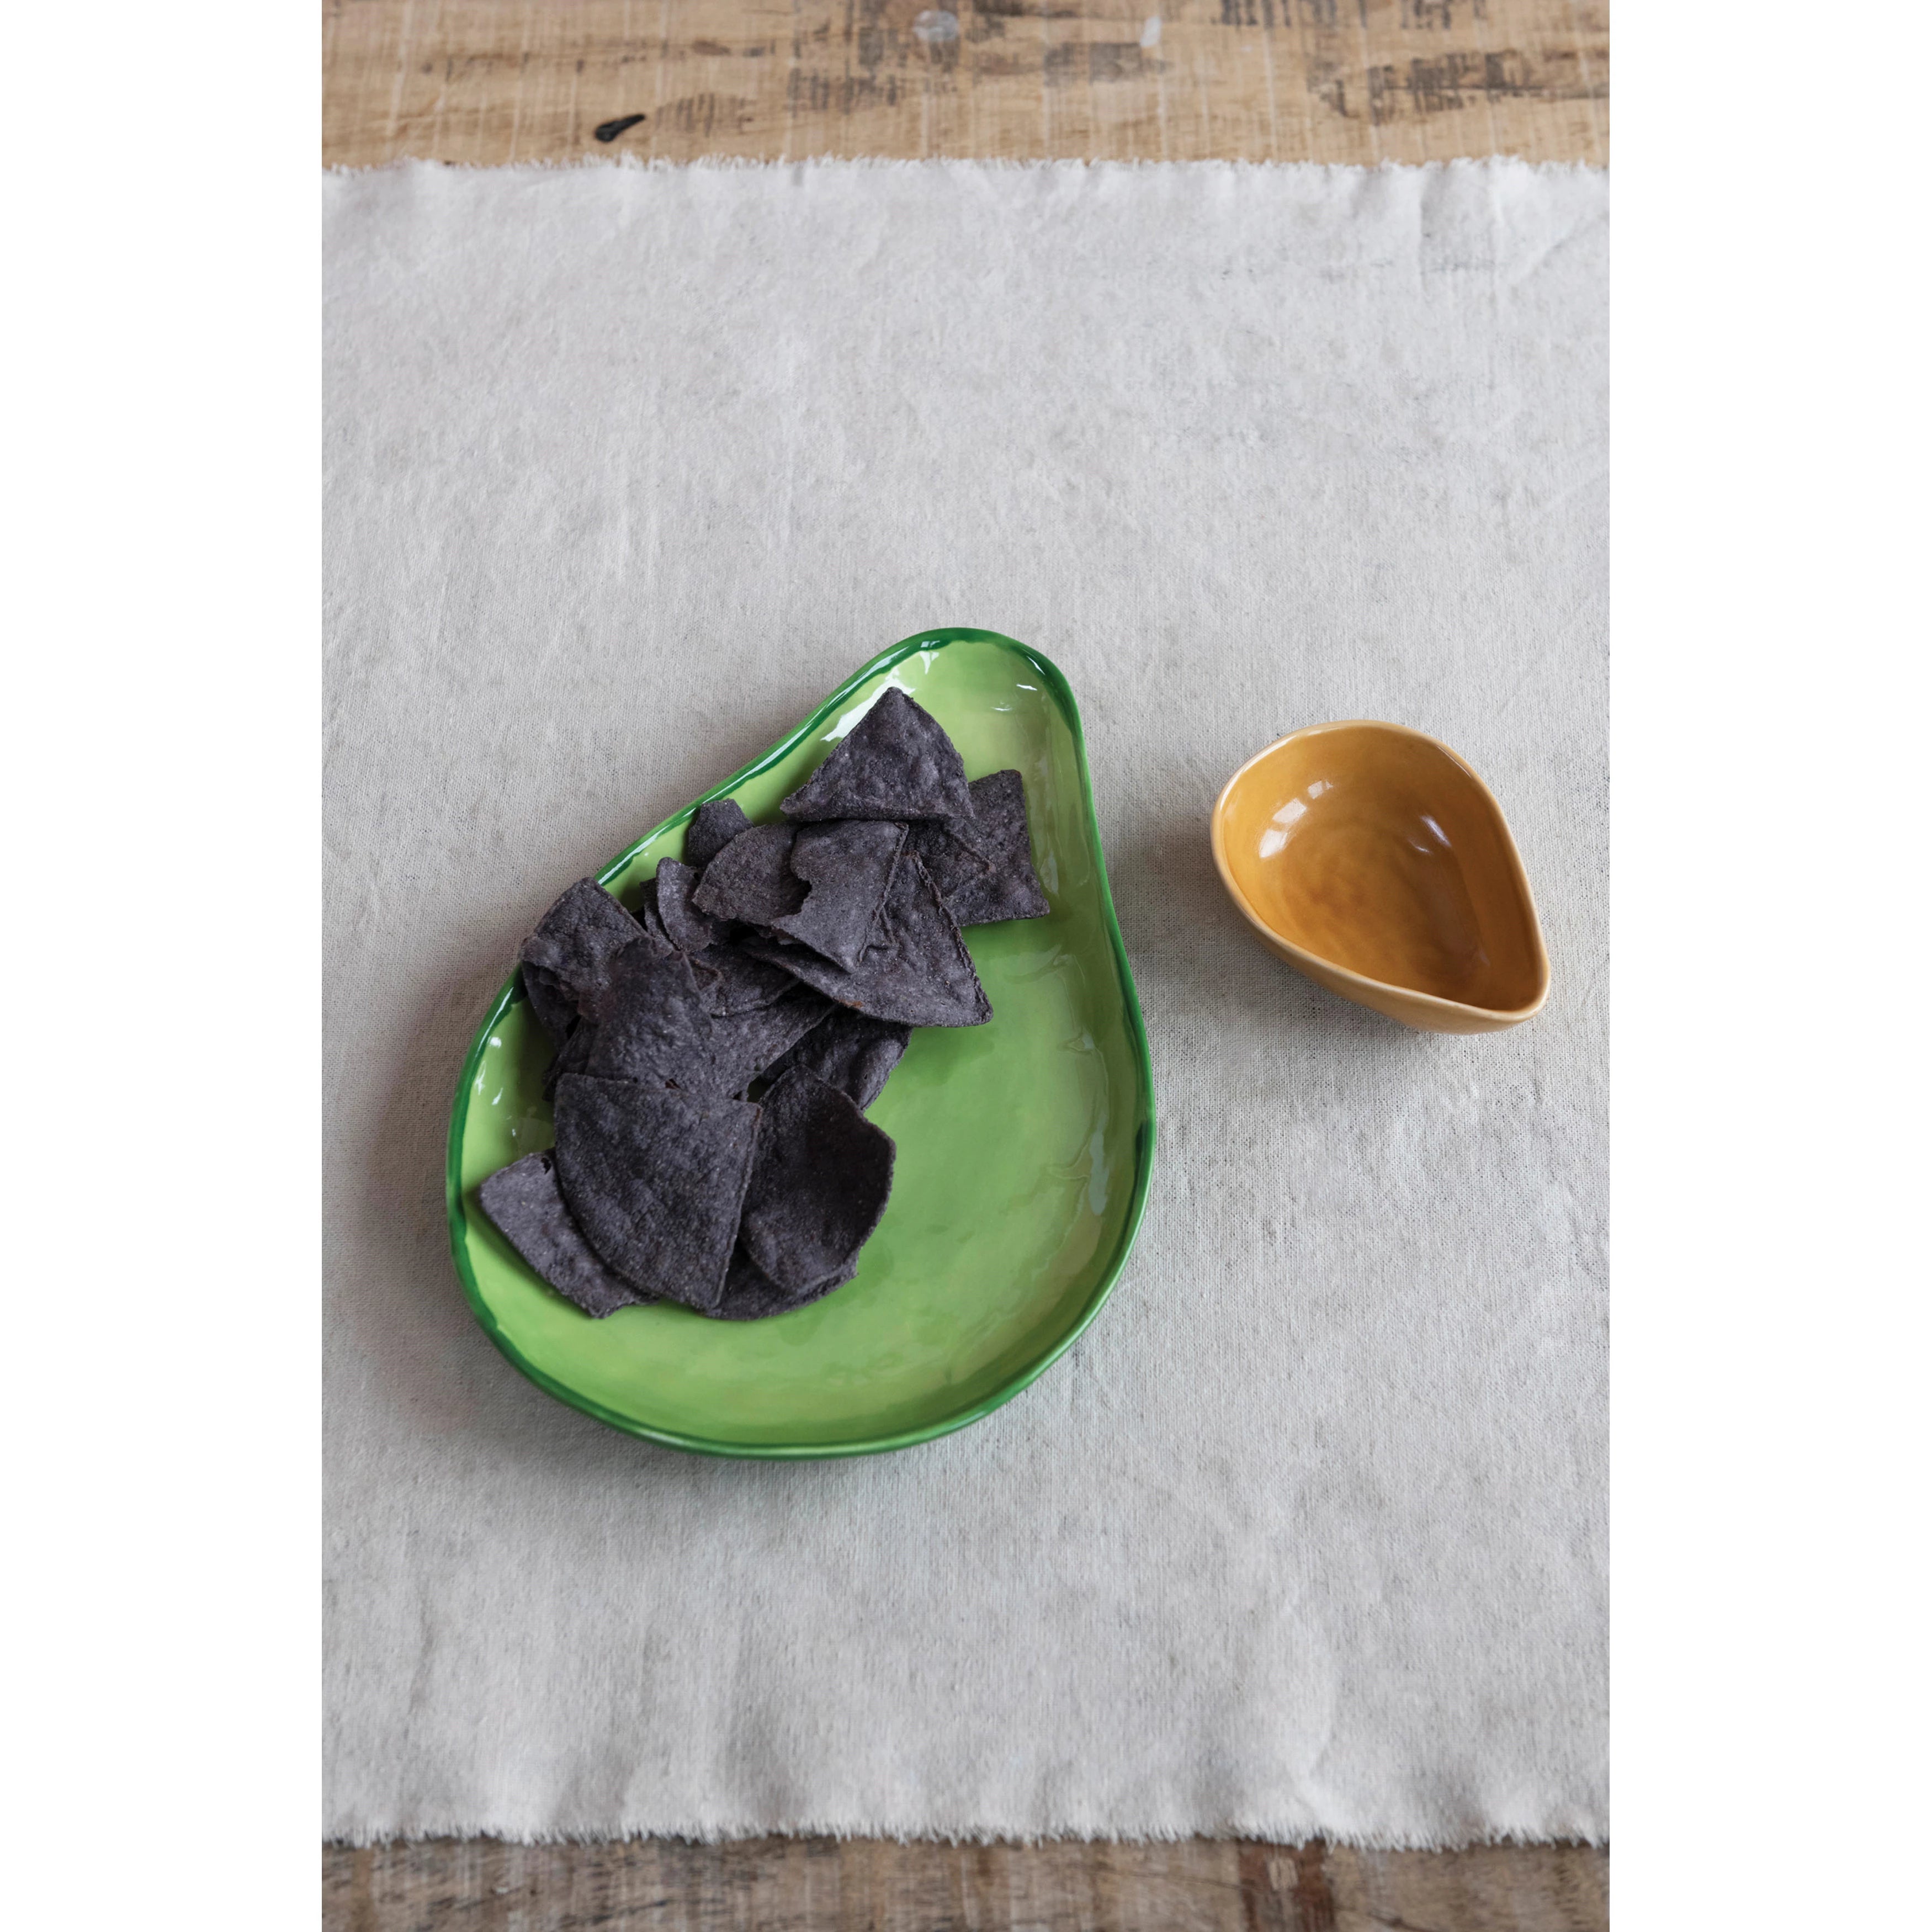 Stoneware Avacado Plate with Pit Bowl